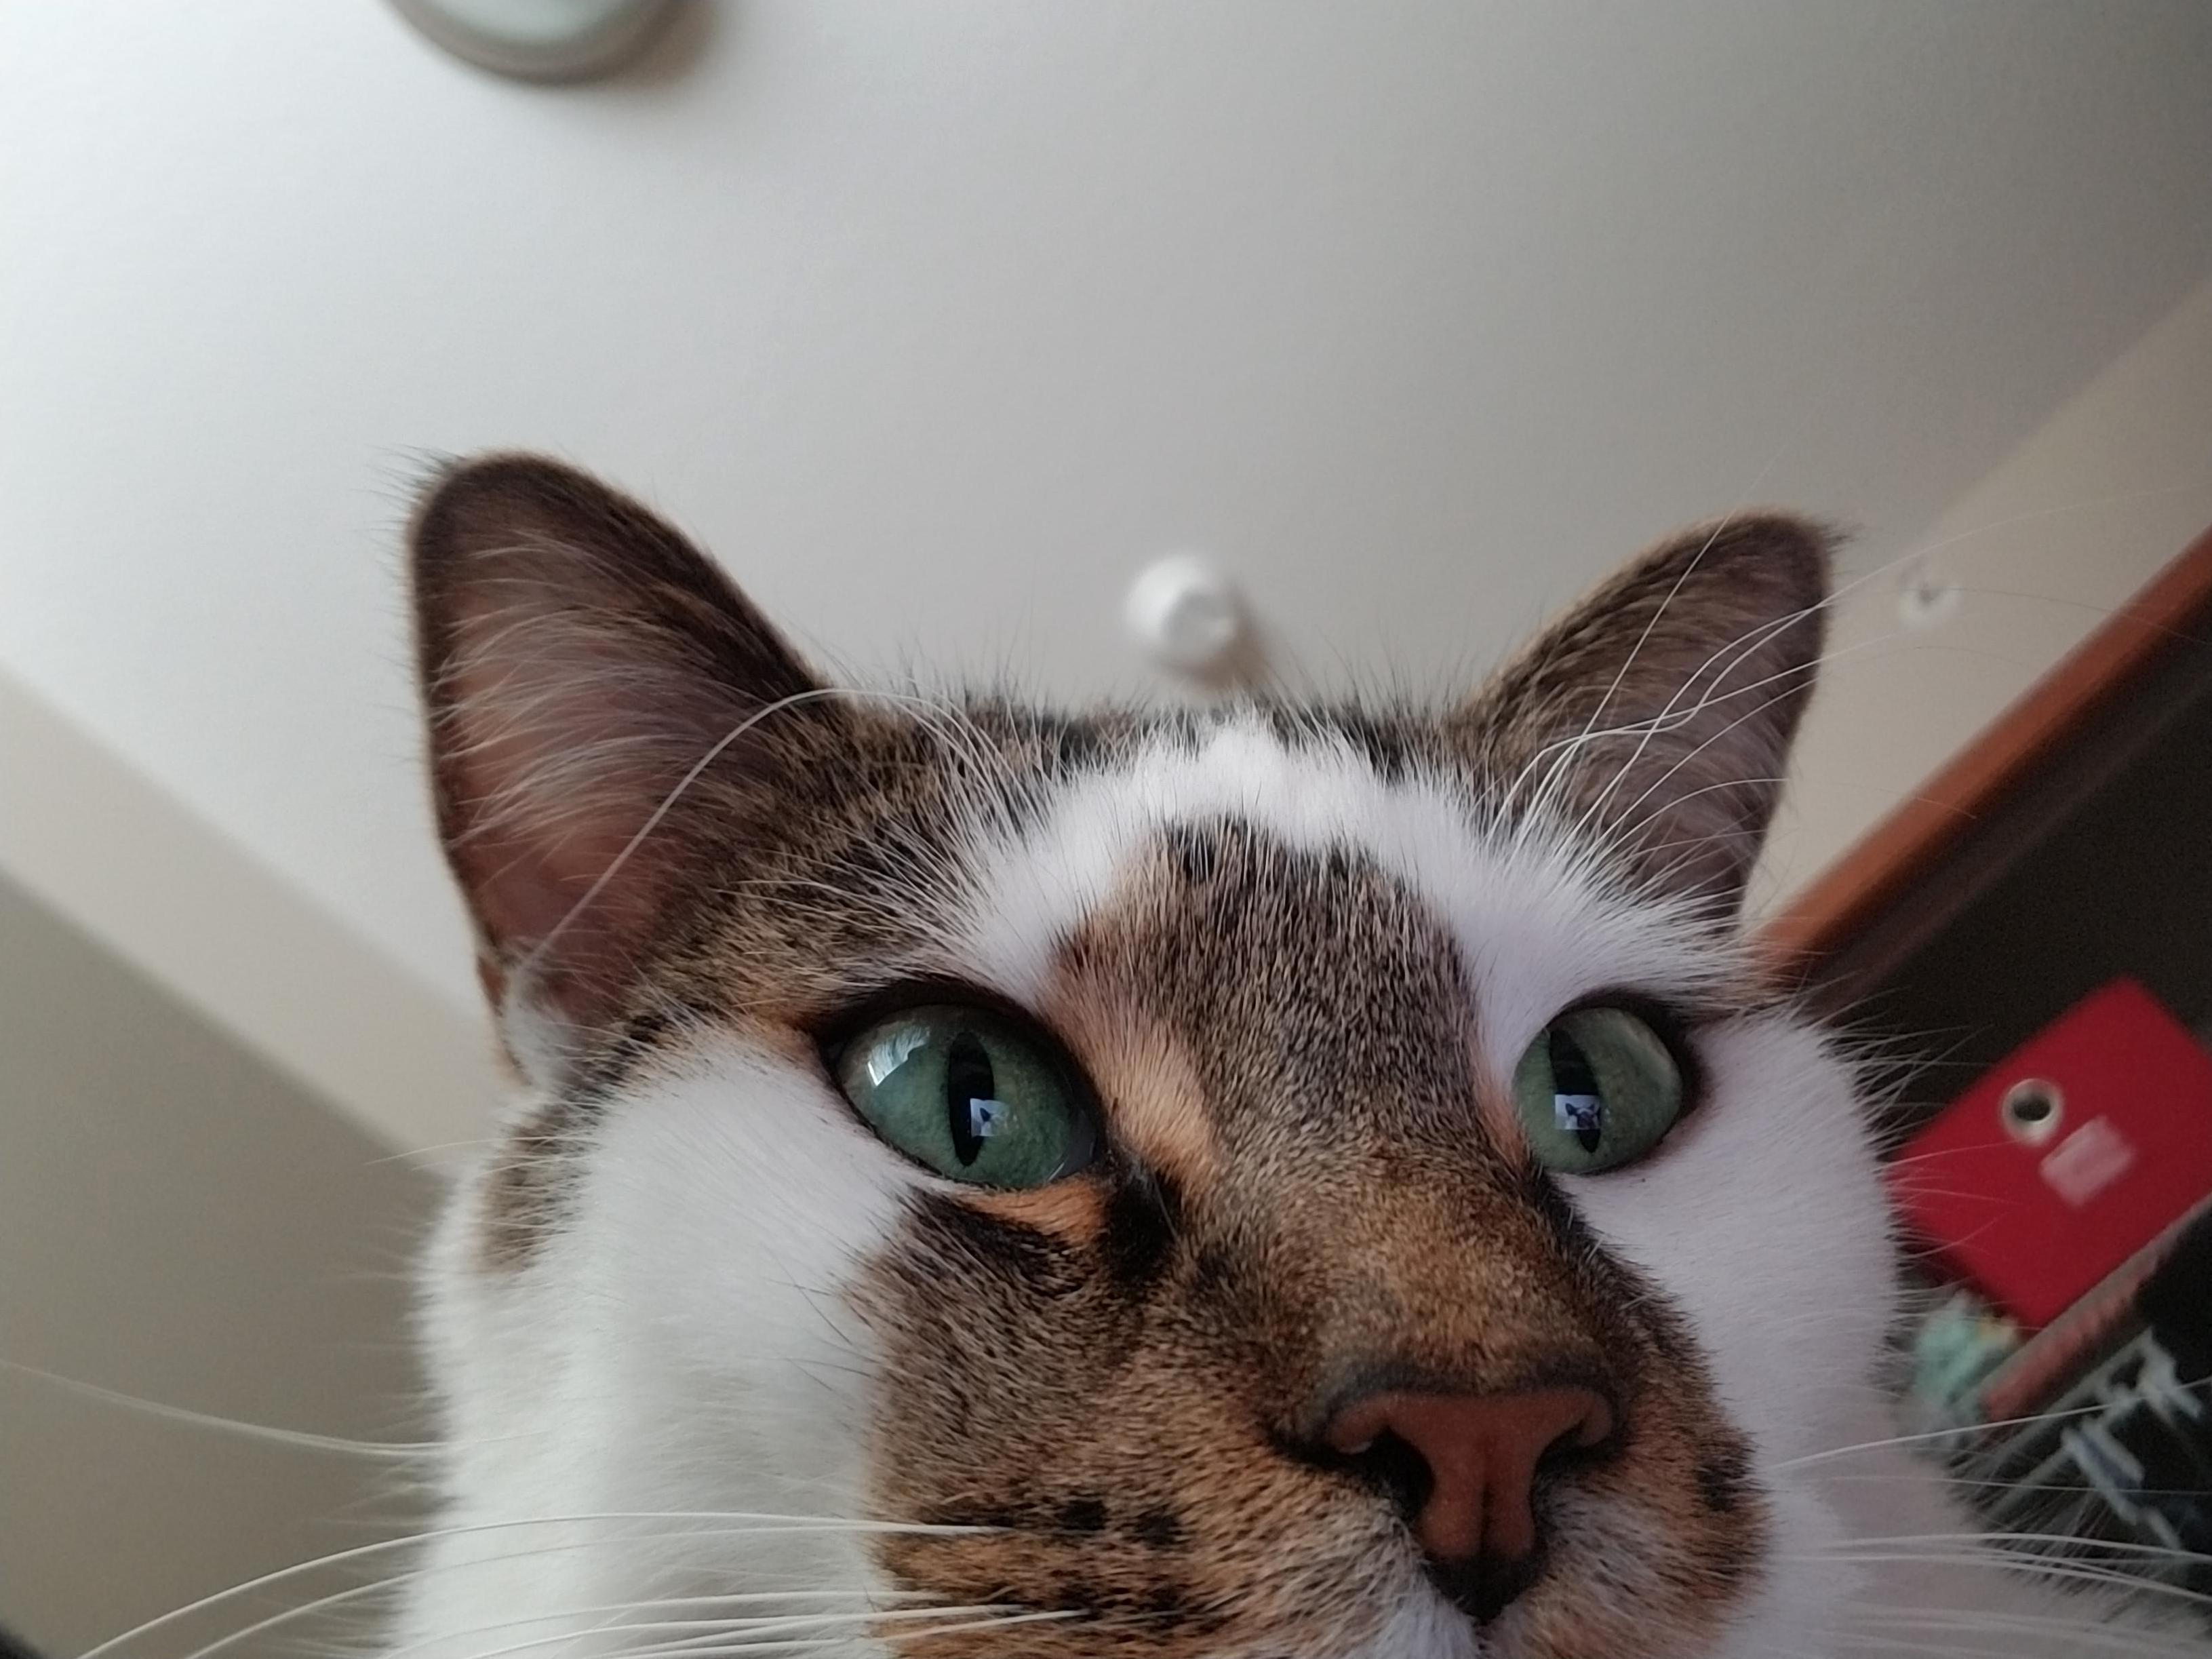 I showed my cat chester what he looked like on my phone, and he decided to take his first selfie.